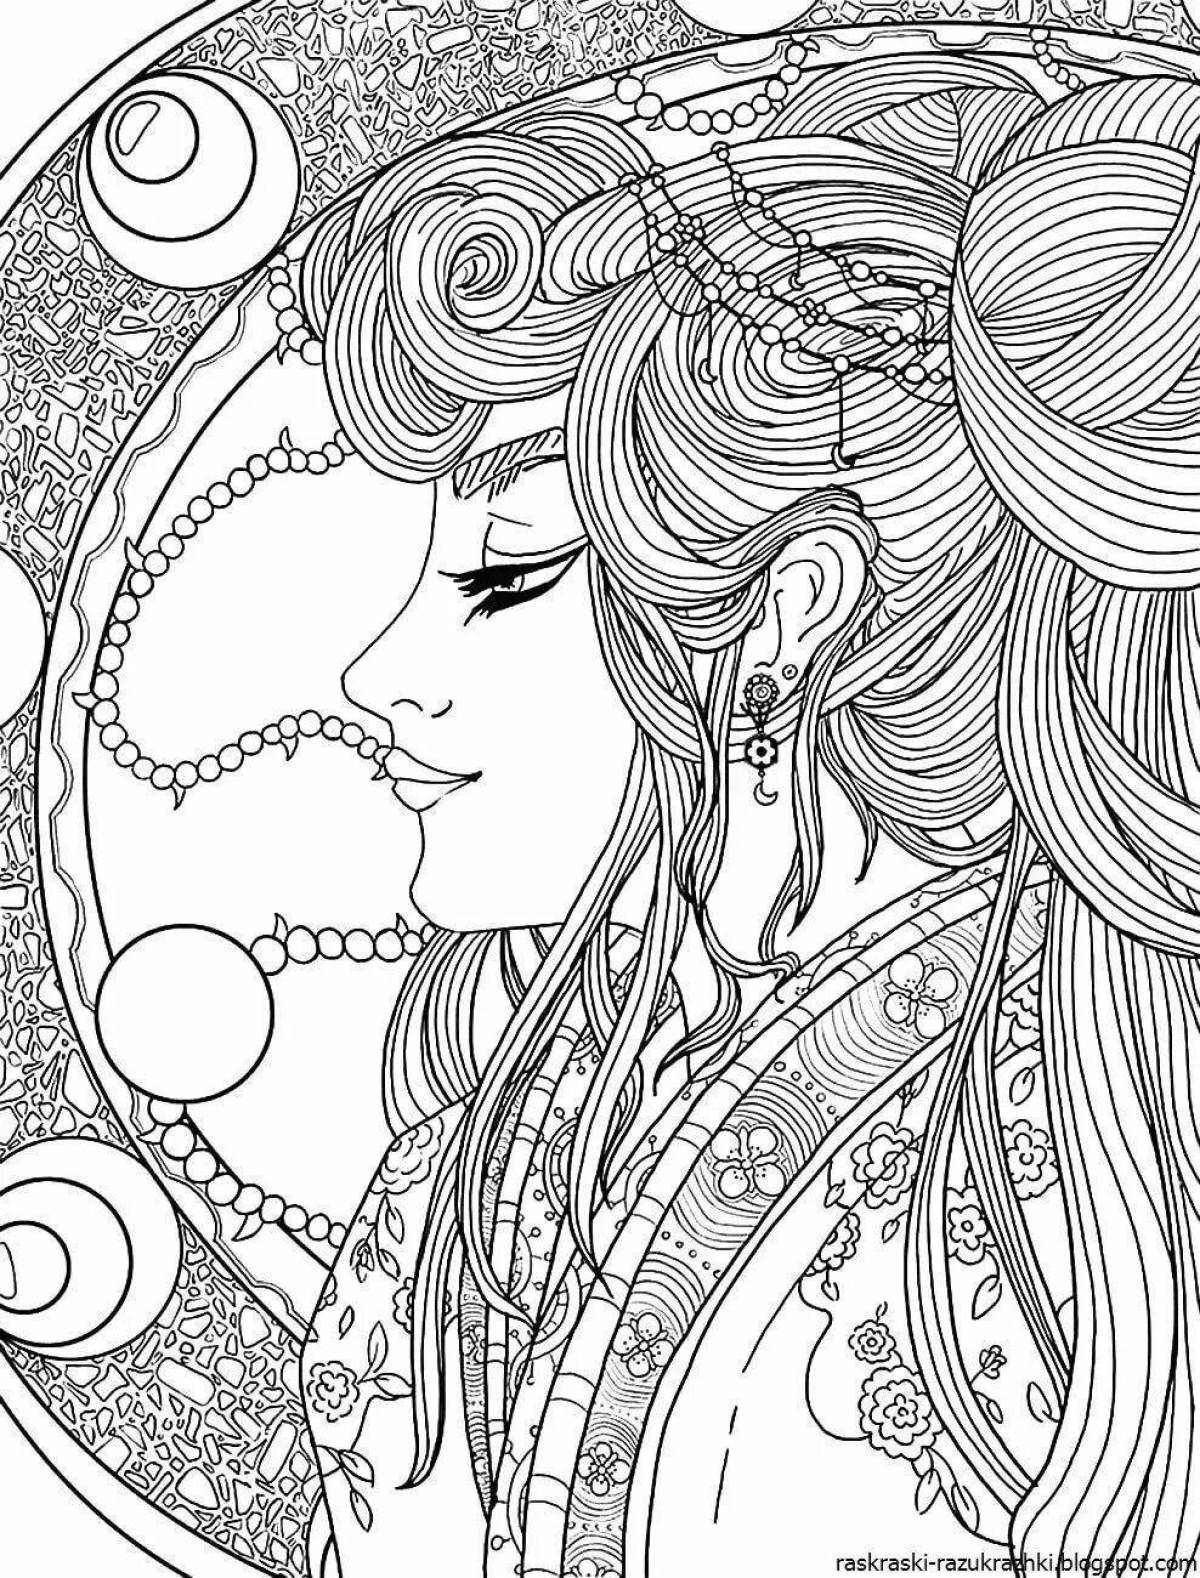 Awesome complex coloring book for girls